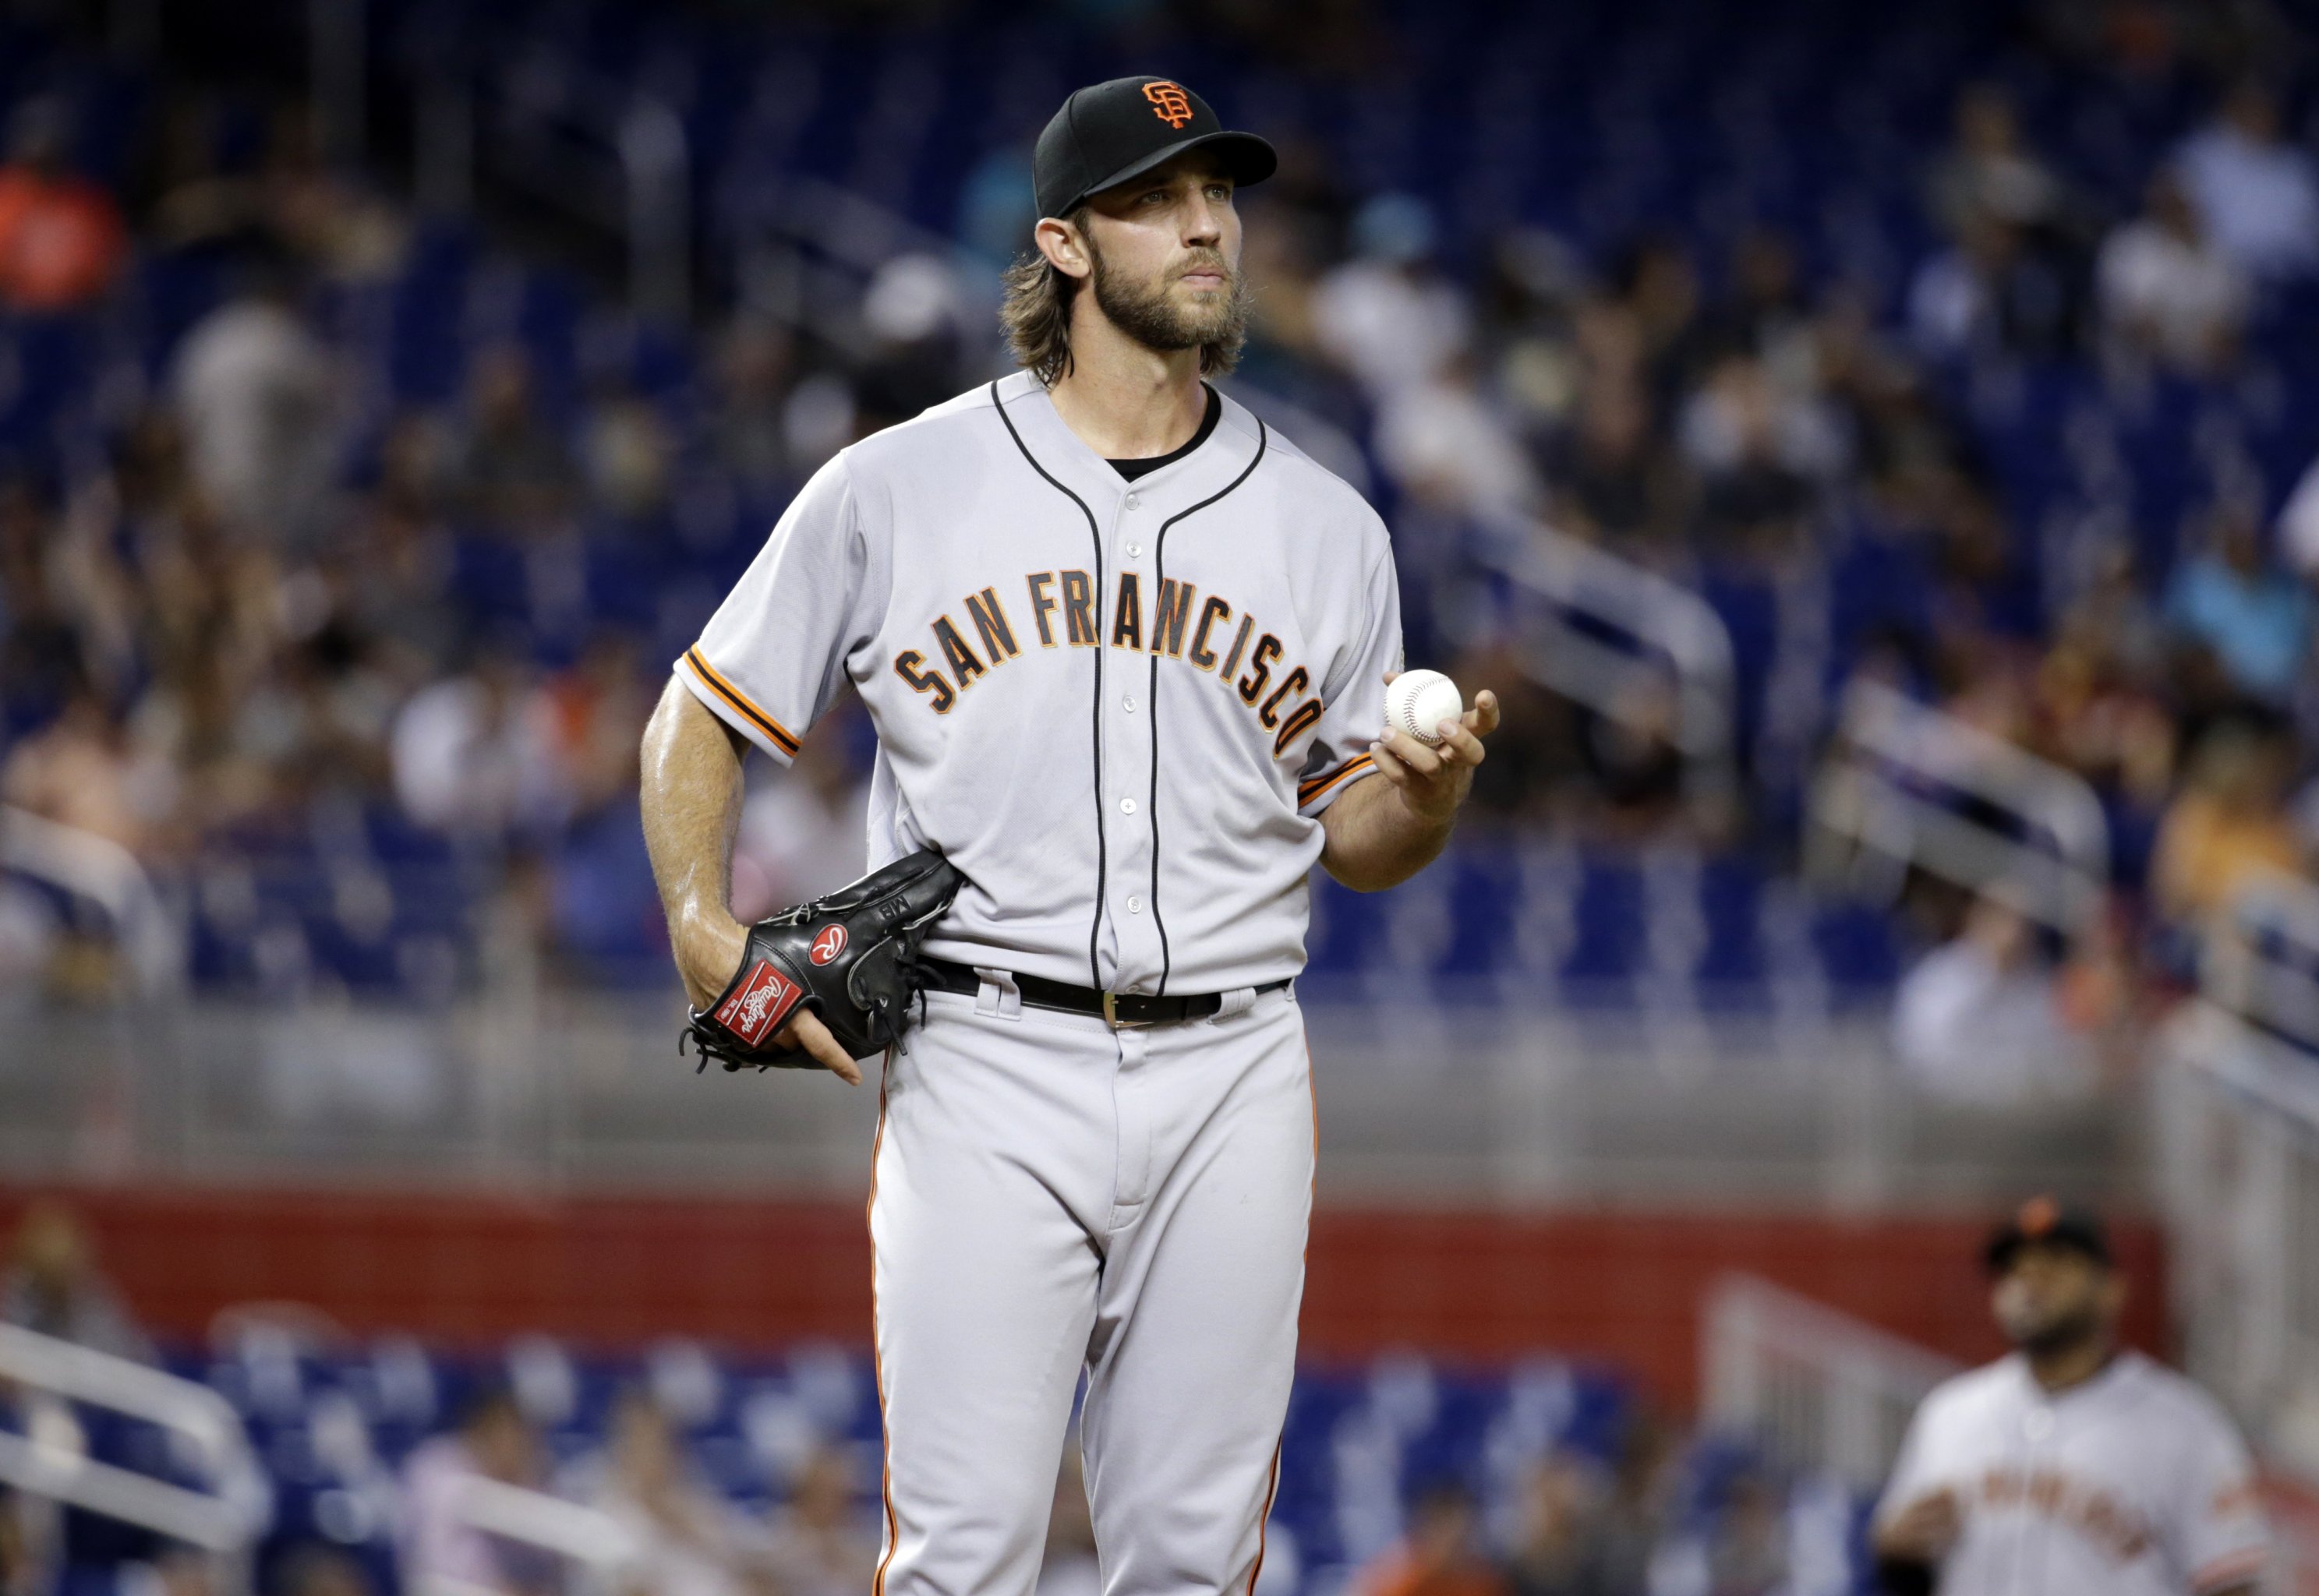 Madison Bumgarner, a Durable Ace, Goes Deep for the Giants - The